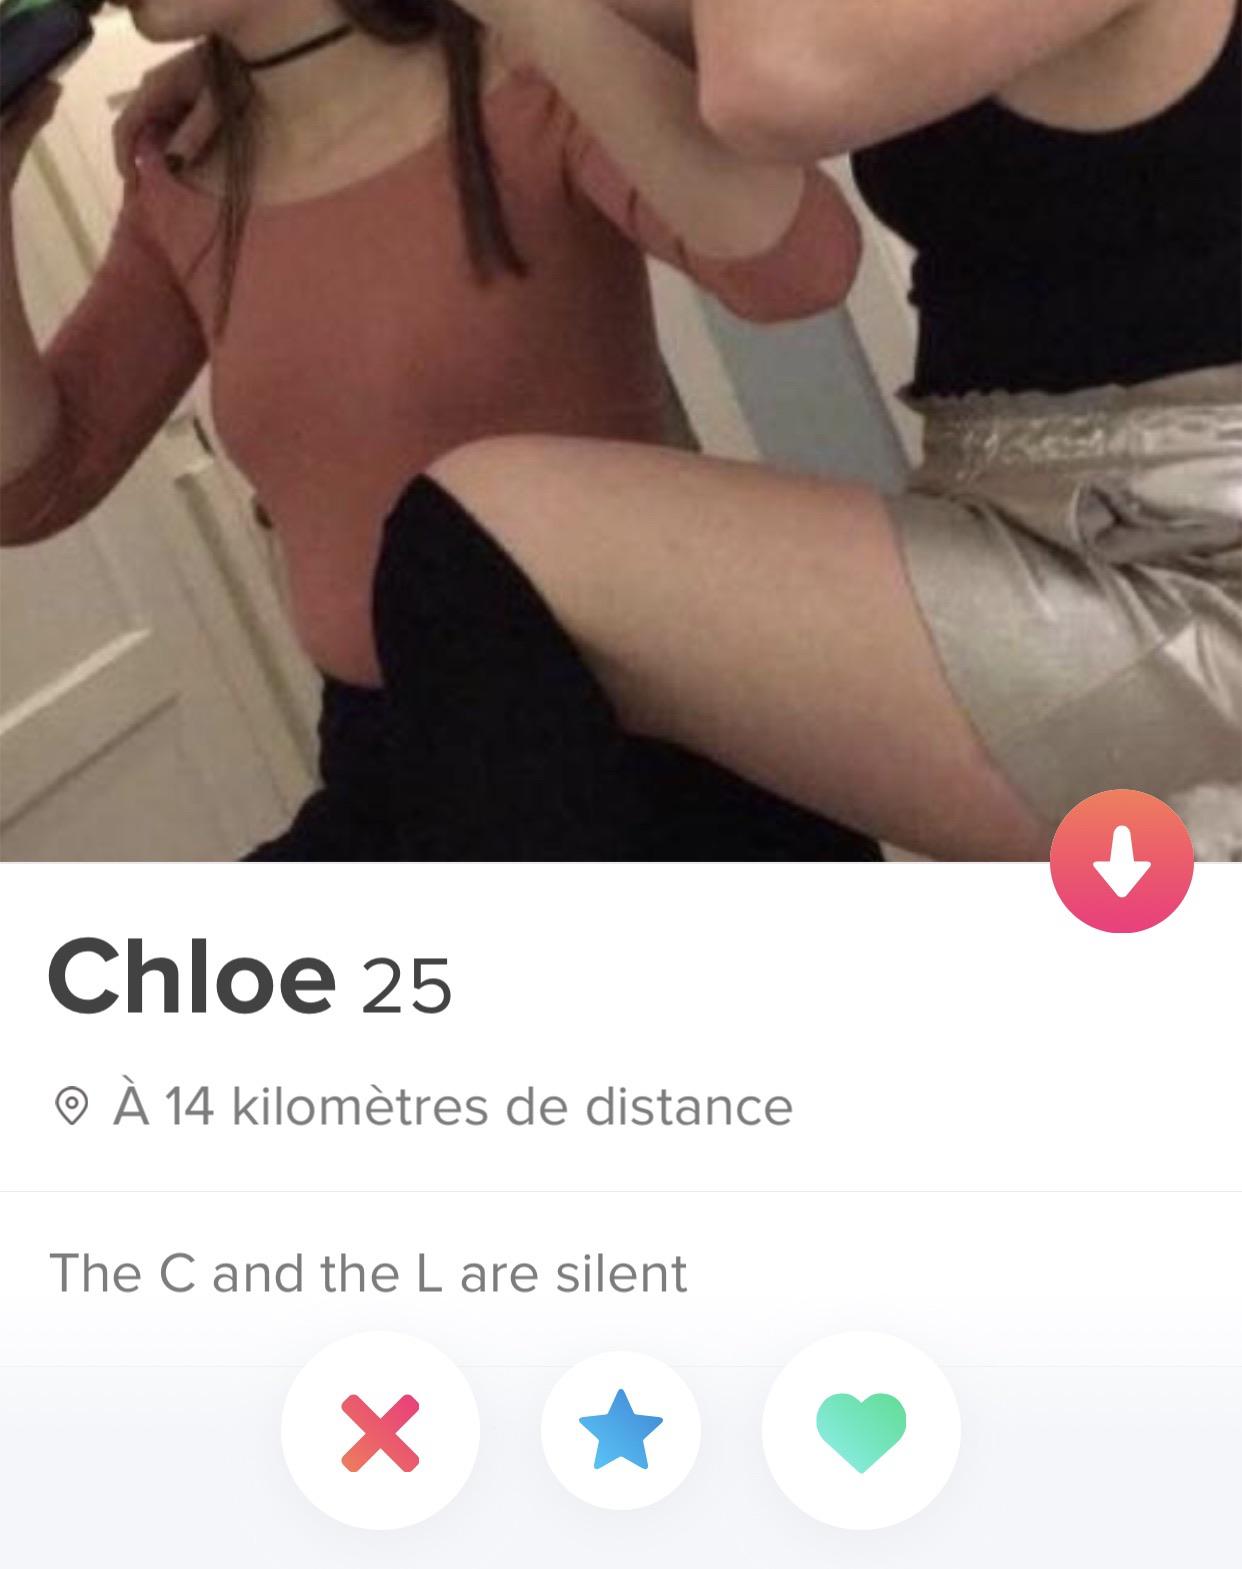 tinder in prison - Chloe 25 14 kilomtres de distance The C and the L are silent